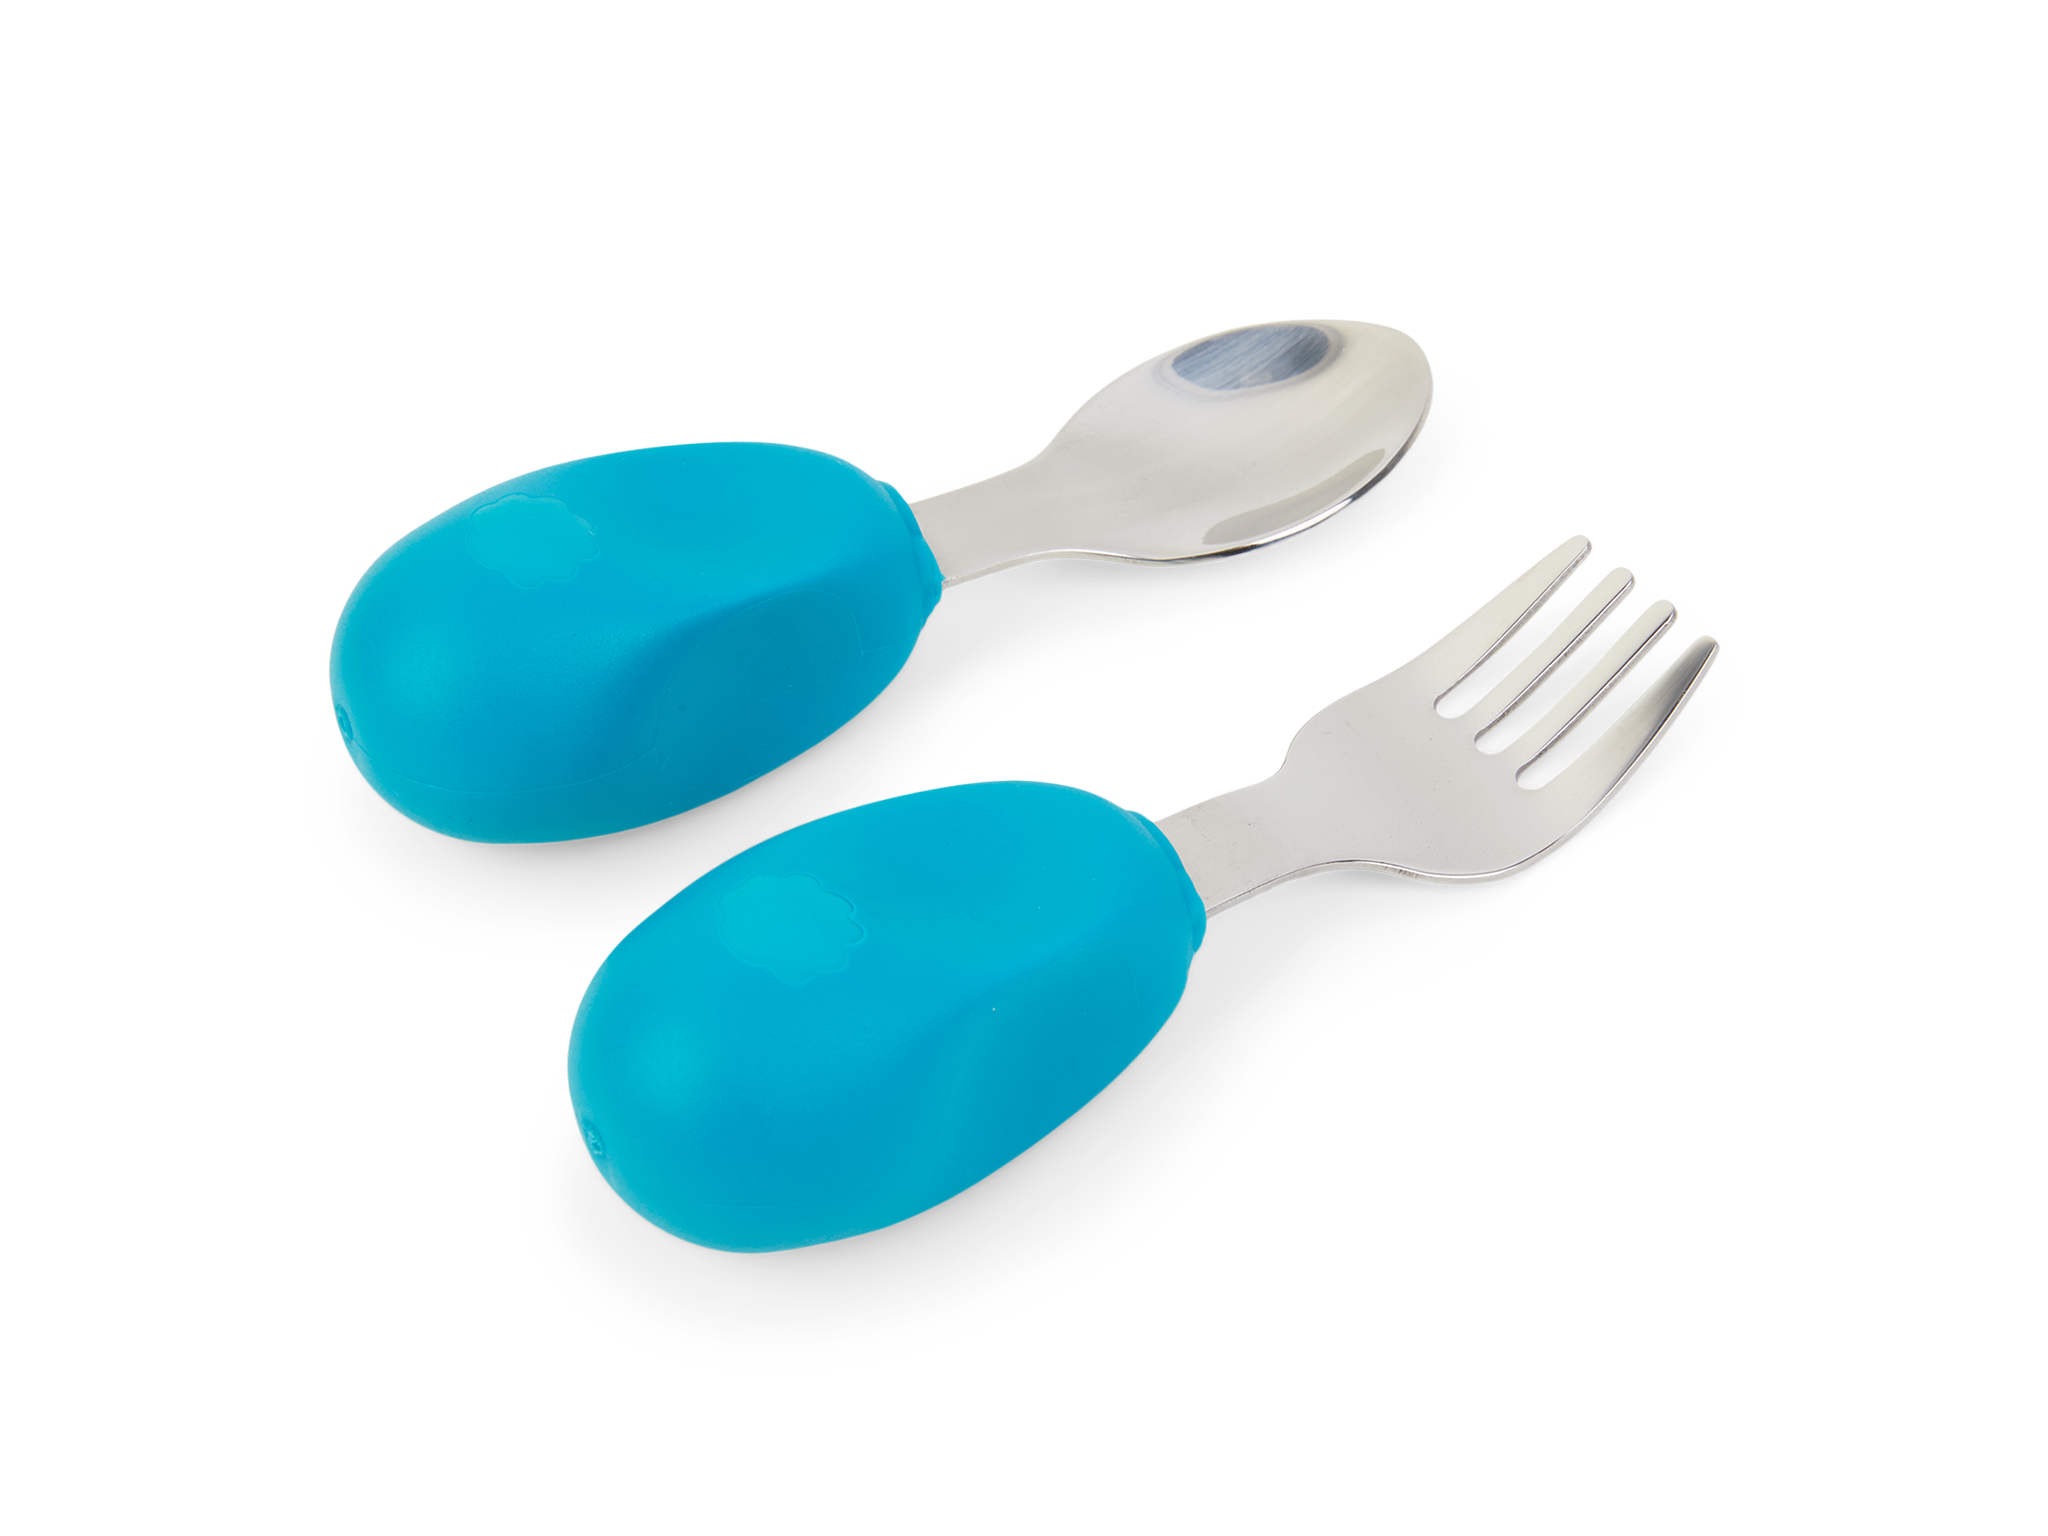 Set of 2 Poylim Ideal for Home and Preschools Cute and Colorful Safe Child Cutlery Toddler Utensil Stainless Steel Kids Flatware Silverware 